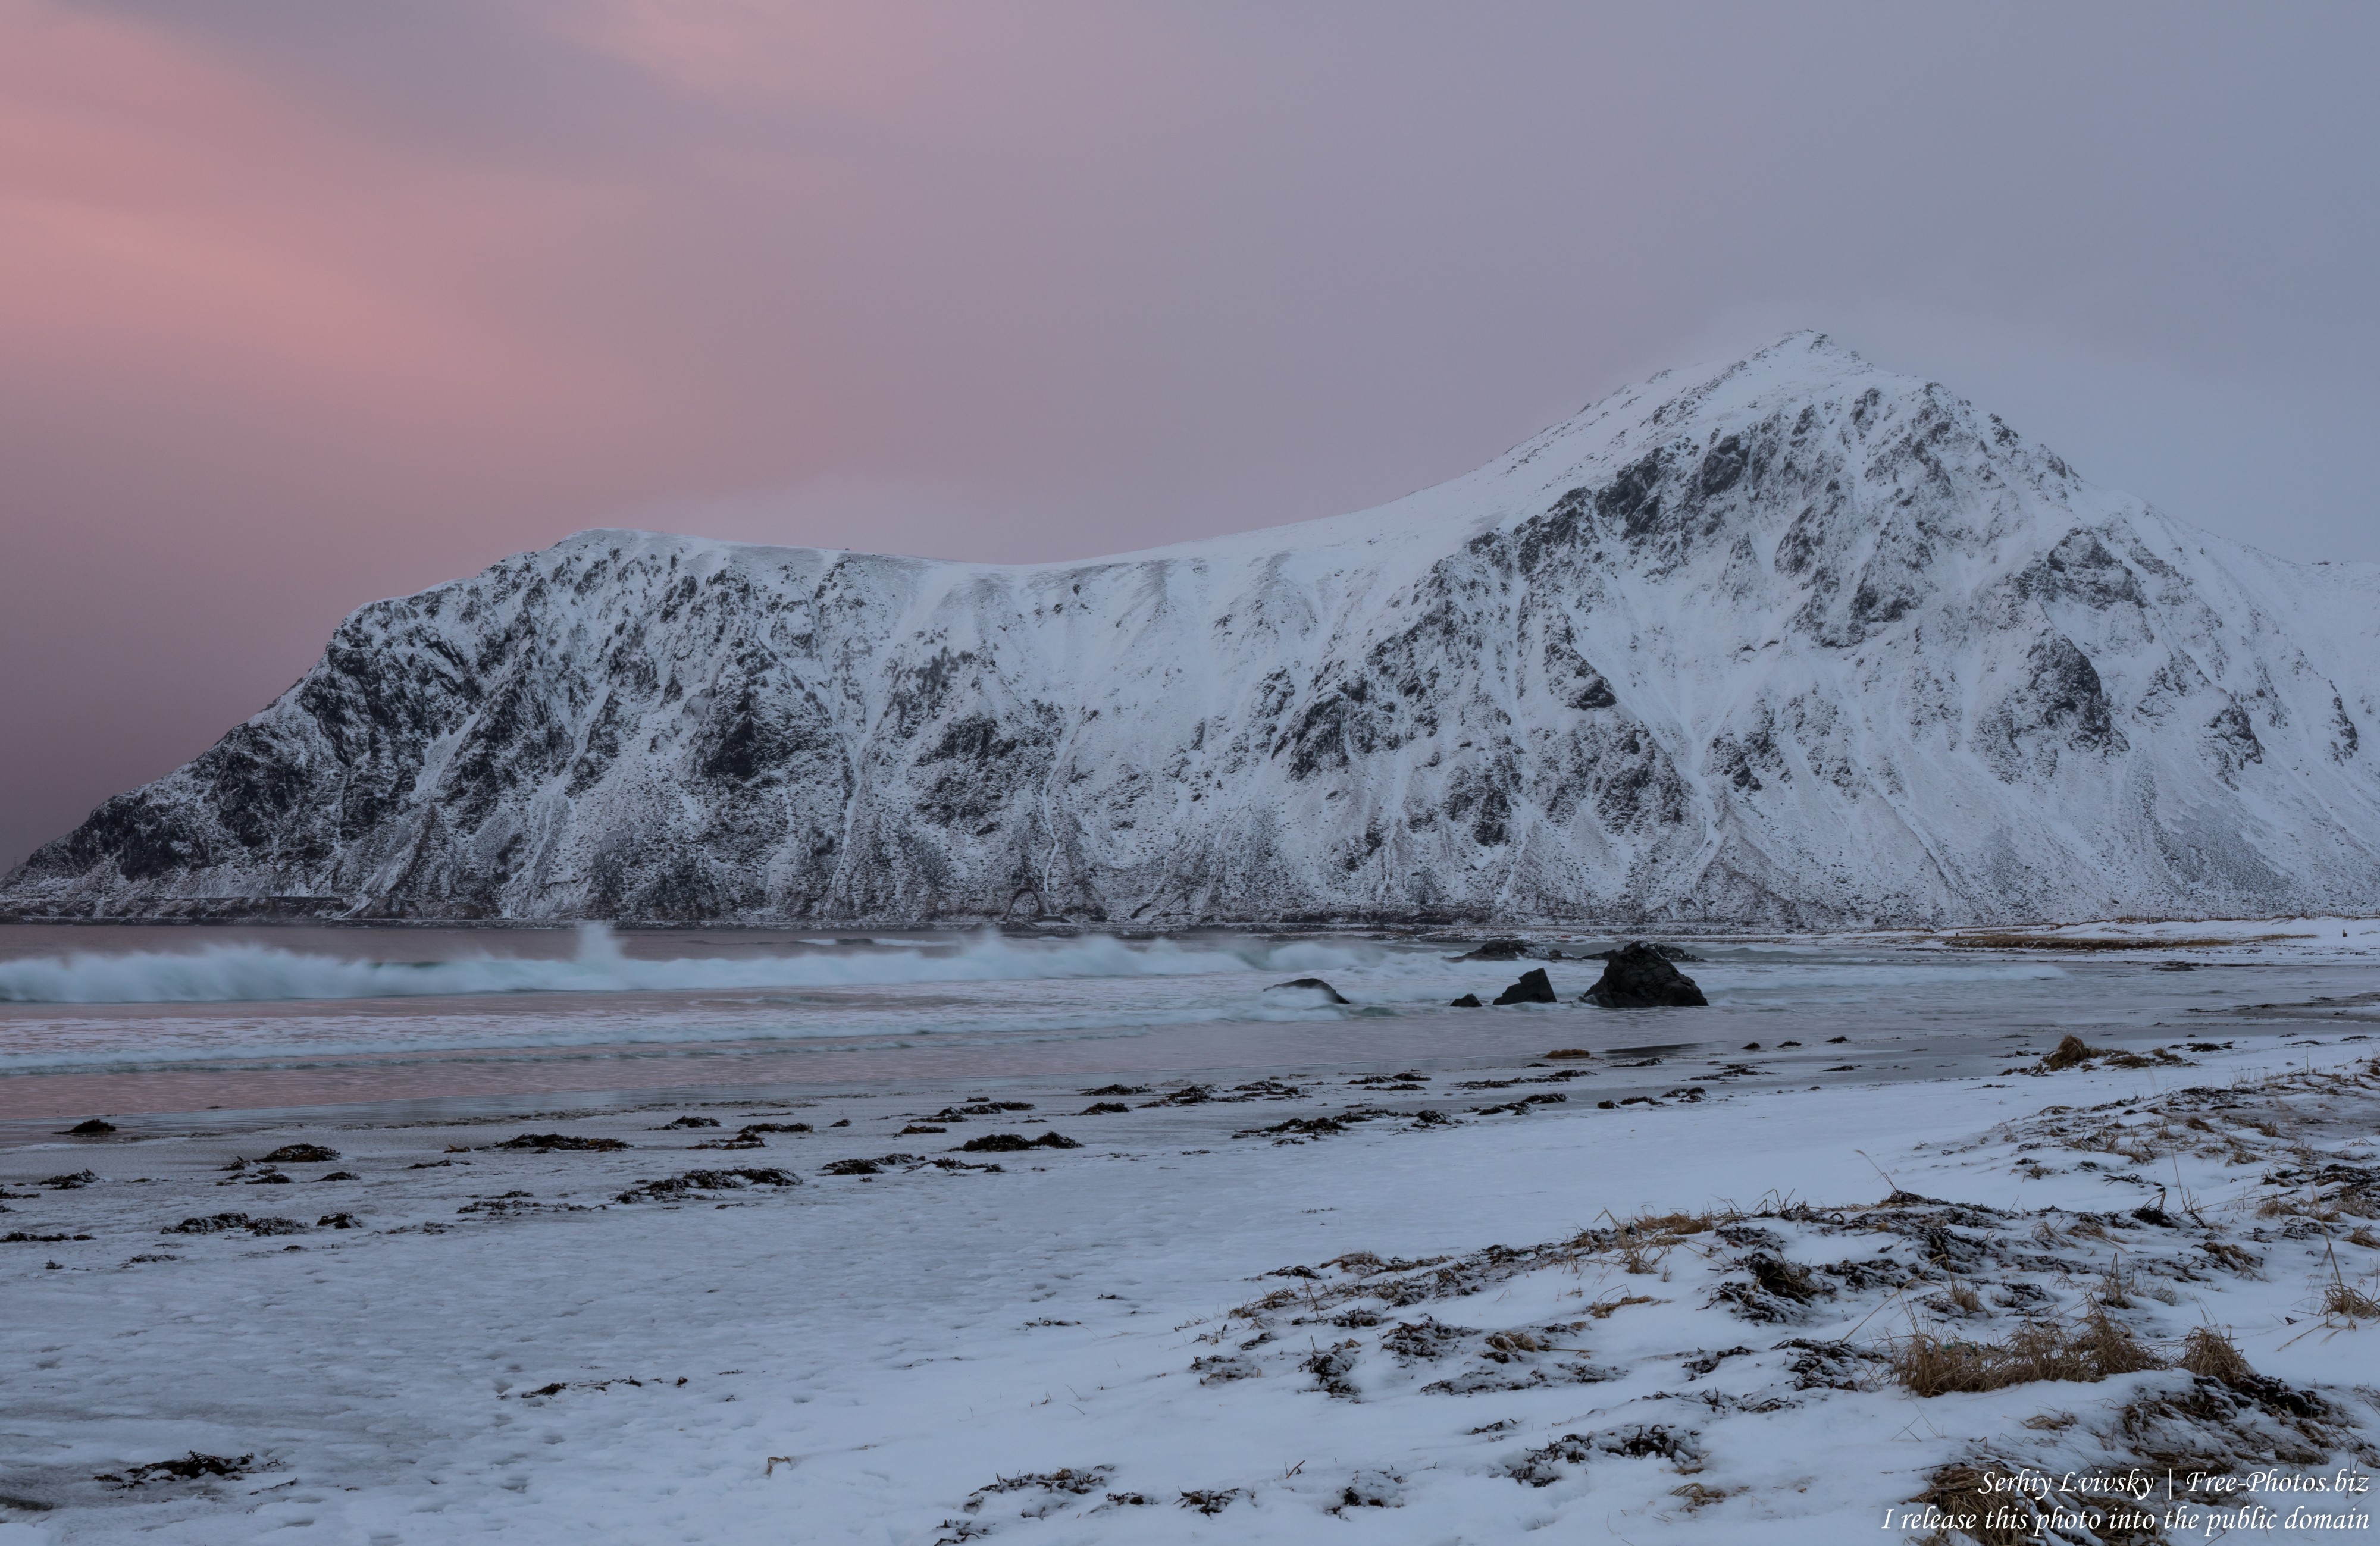 Skagsanden beach, Norway, photographed in February 2020 by Serhiy Lvivsky, picture 1